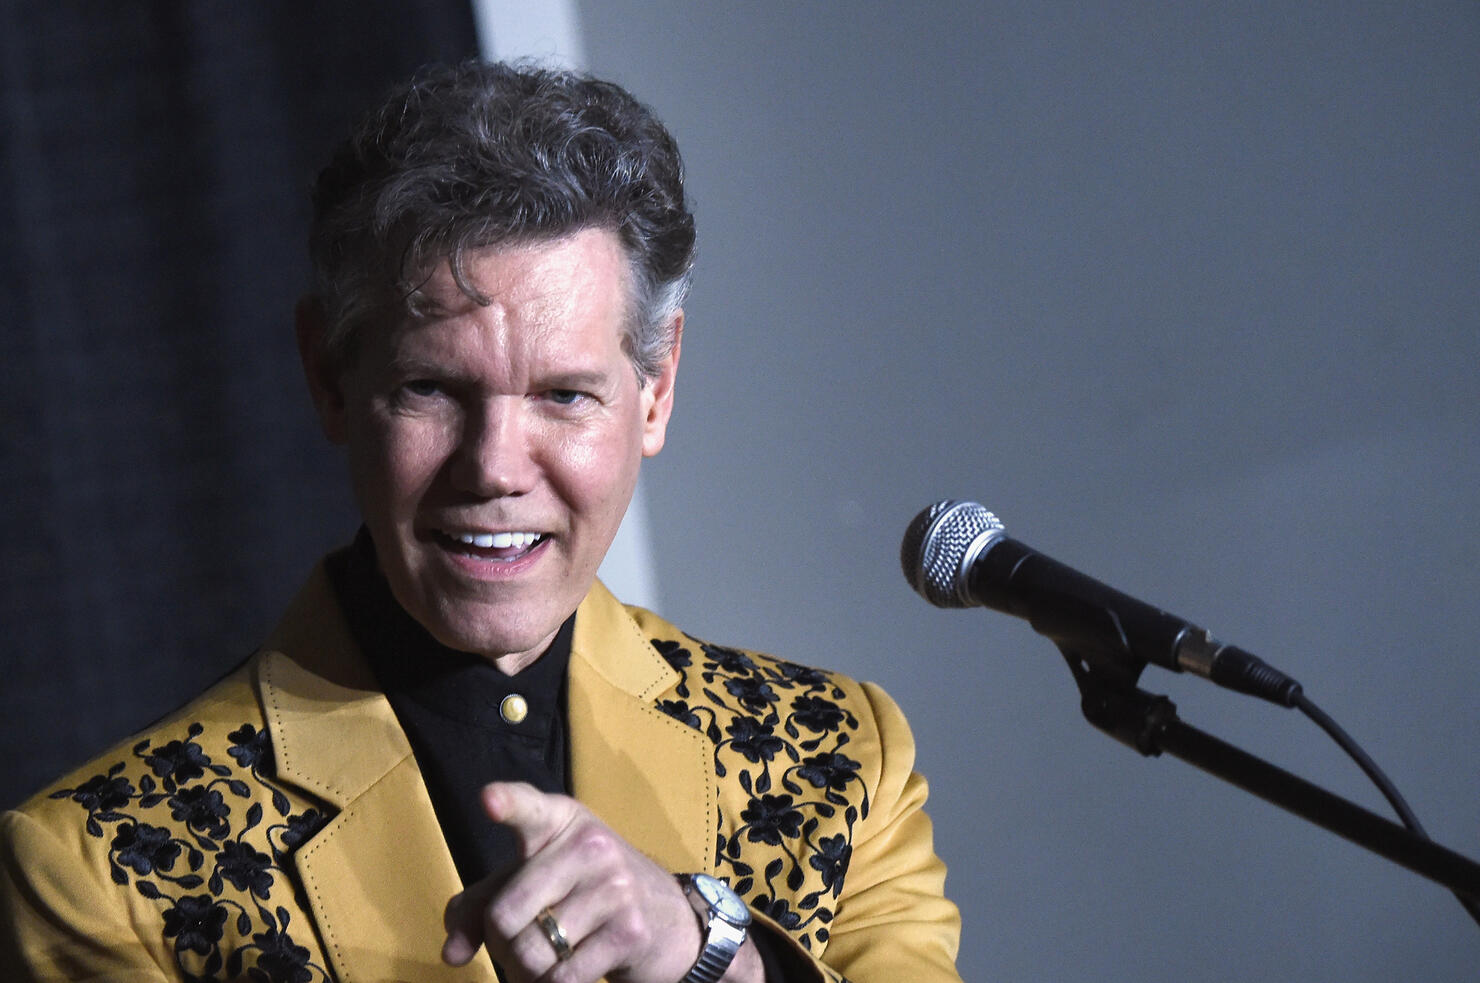 1 Night. 1 Place. 1 Time: A Heroes & Friends Tribute to Randy Travis